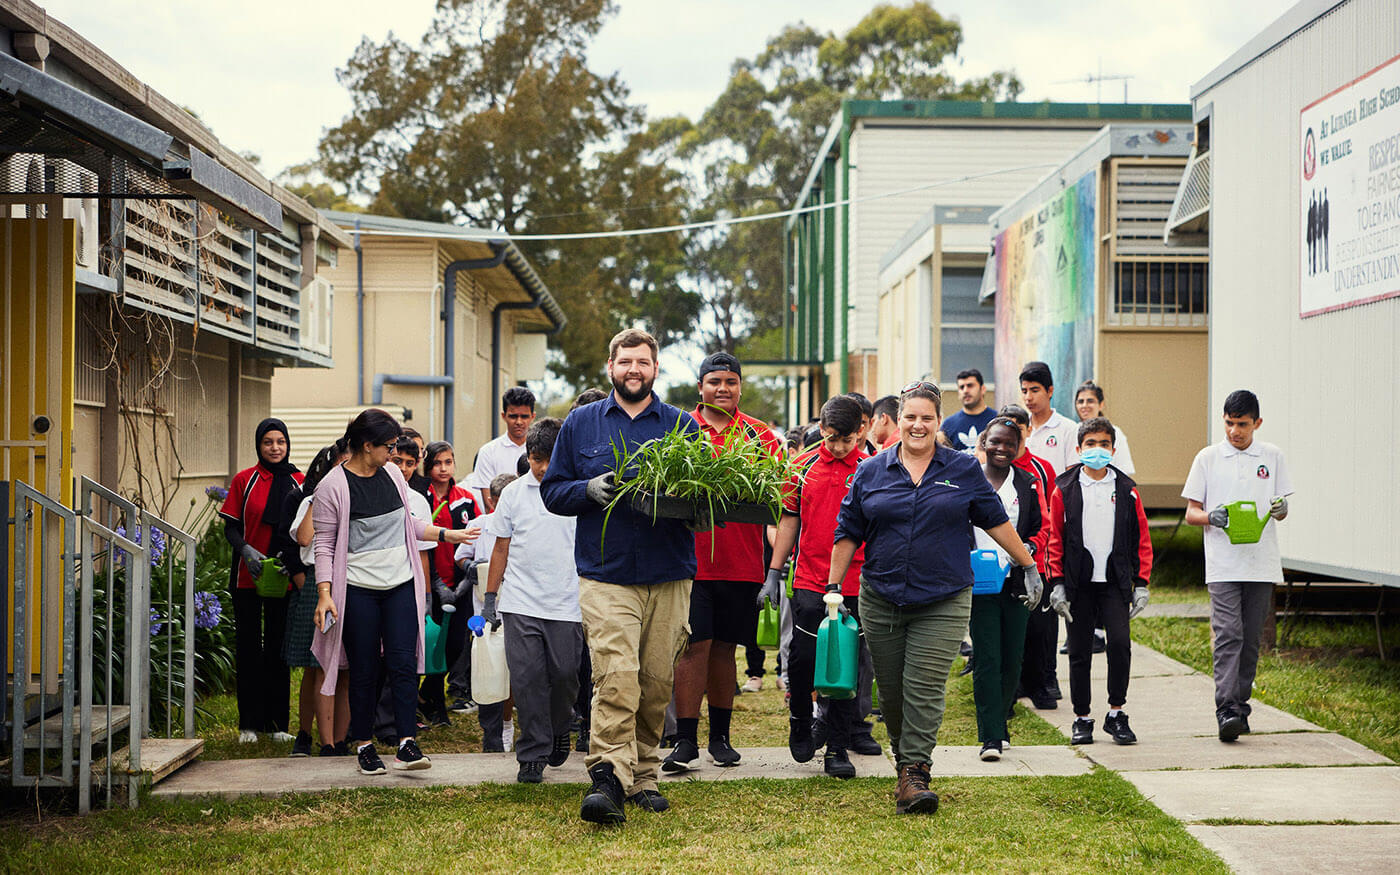 School children and staff walking with plants